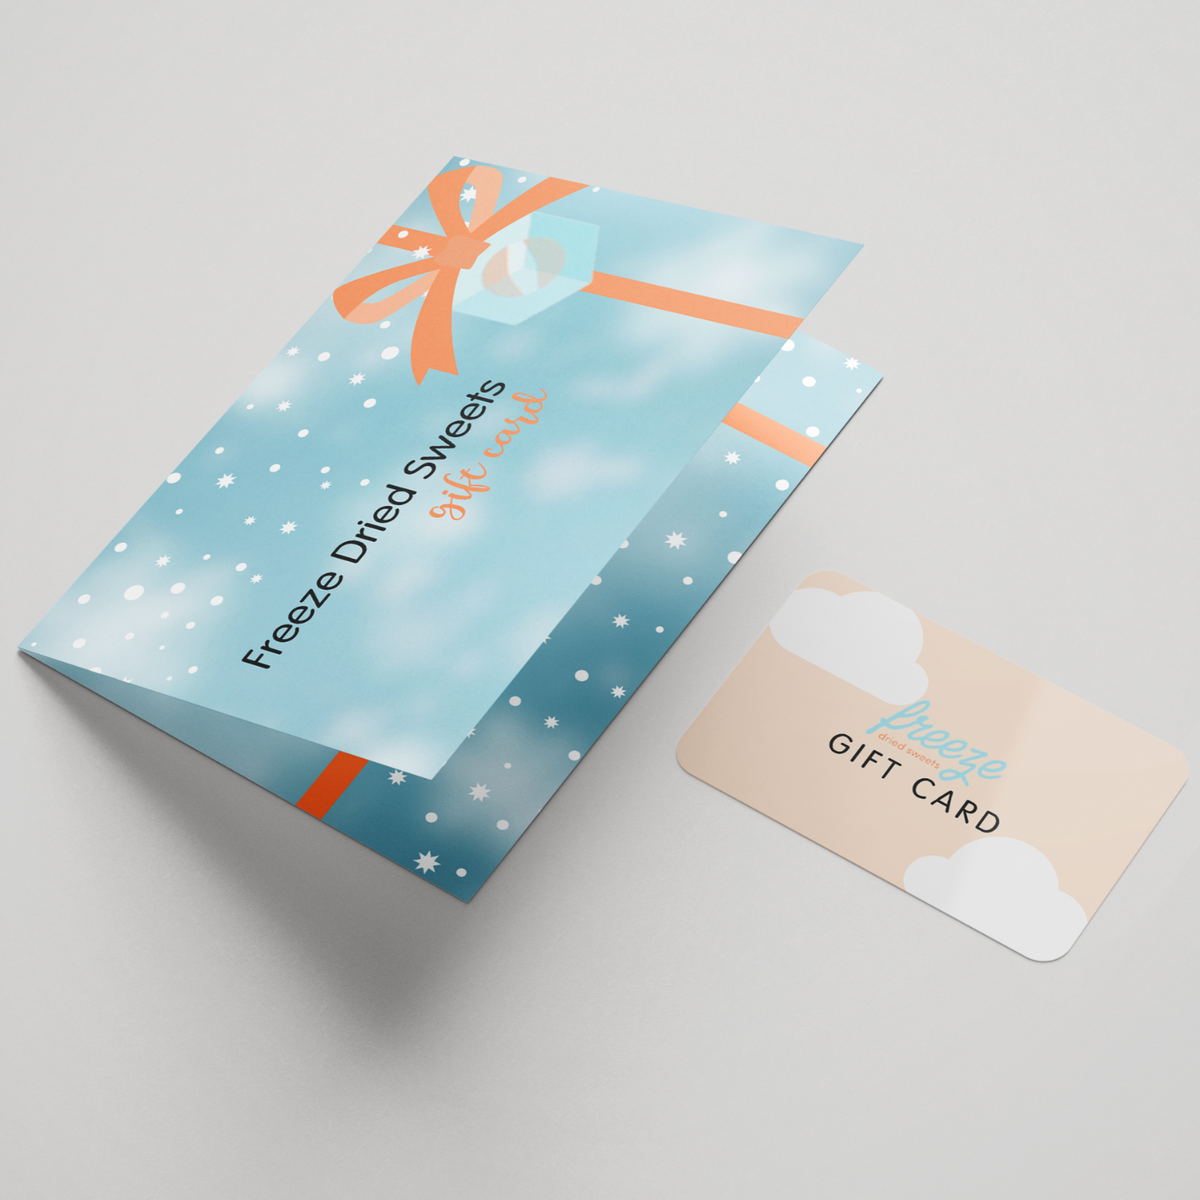 Freeze Drying Supplies Gift Card